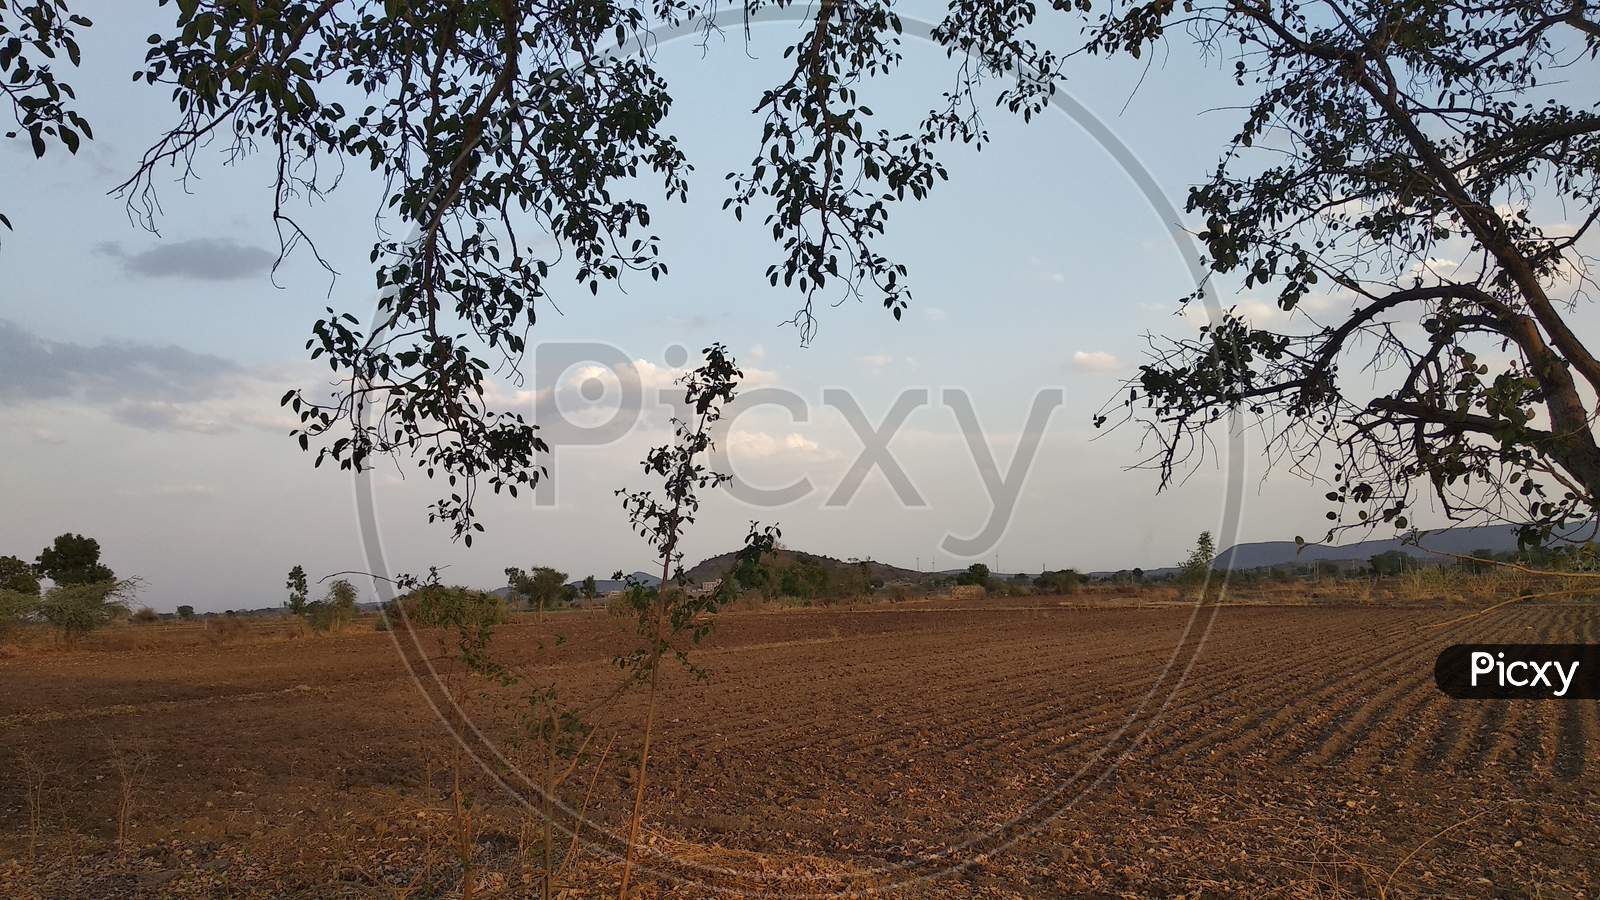 panorama of rural indian dry grassy farm land stretching out under a cloud filled sky with native trees, good for native habitat, dotted along the horizon, gujrat, india